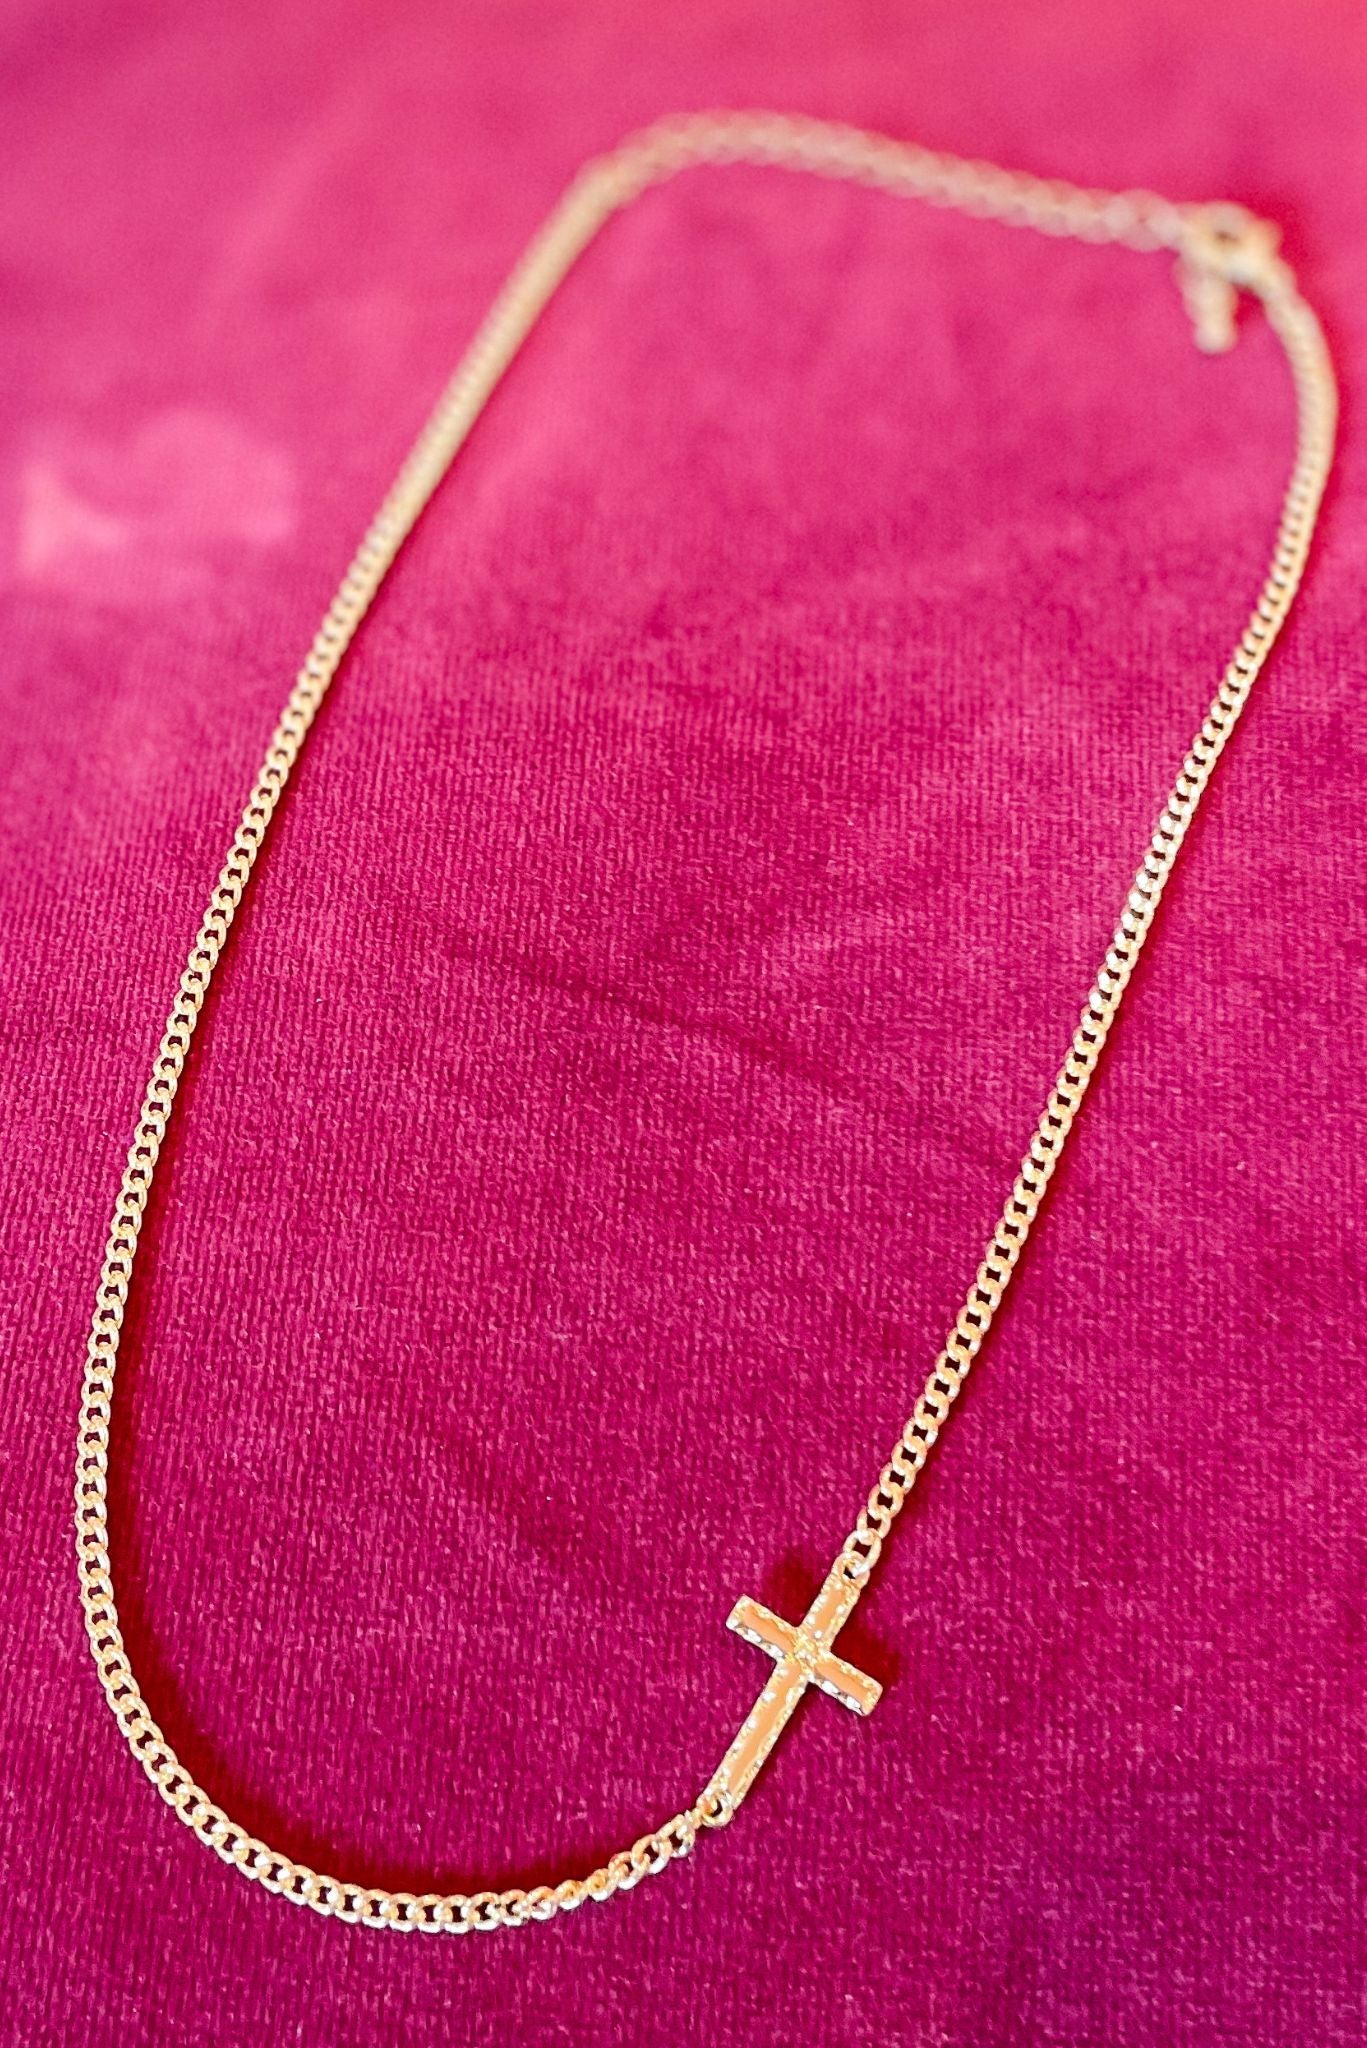 Gold Cross Accent Chain Necklace, fall fashion, must have, chic, elevated look, everyday wear, mom style, shop style your senses by mallory fitzsimmons